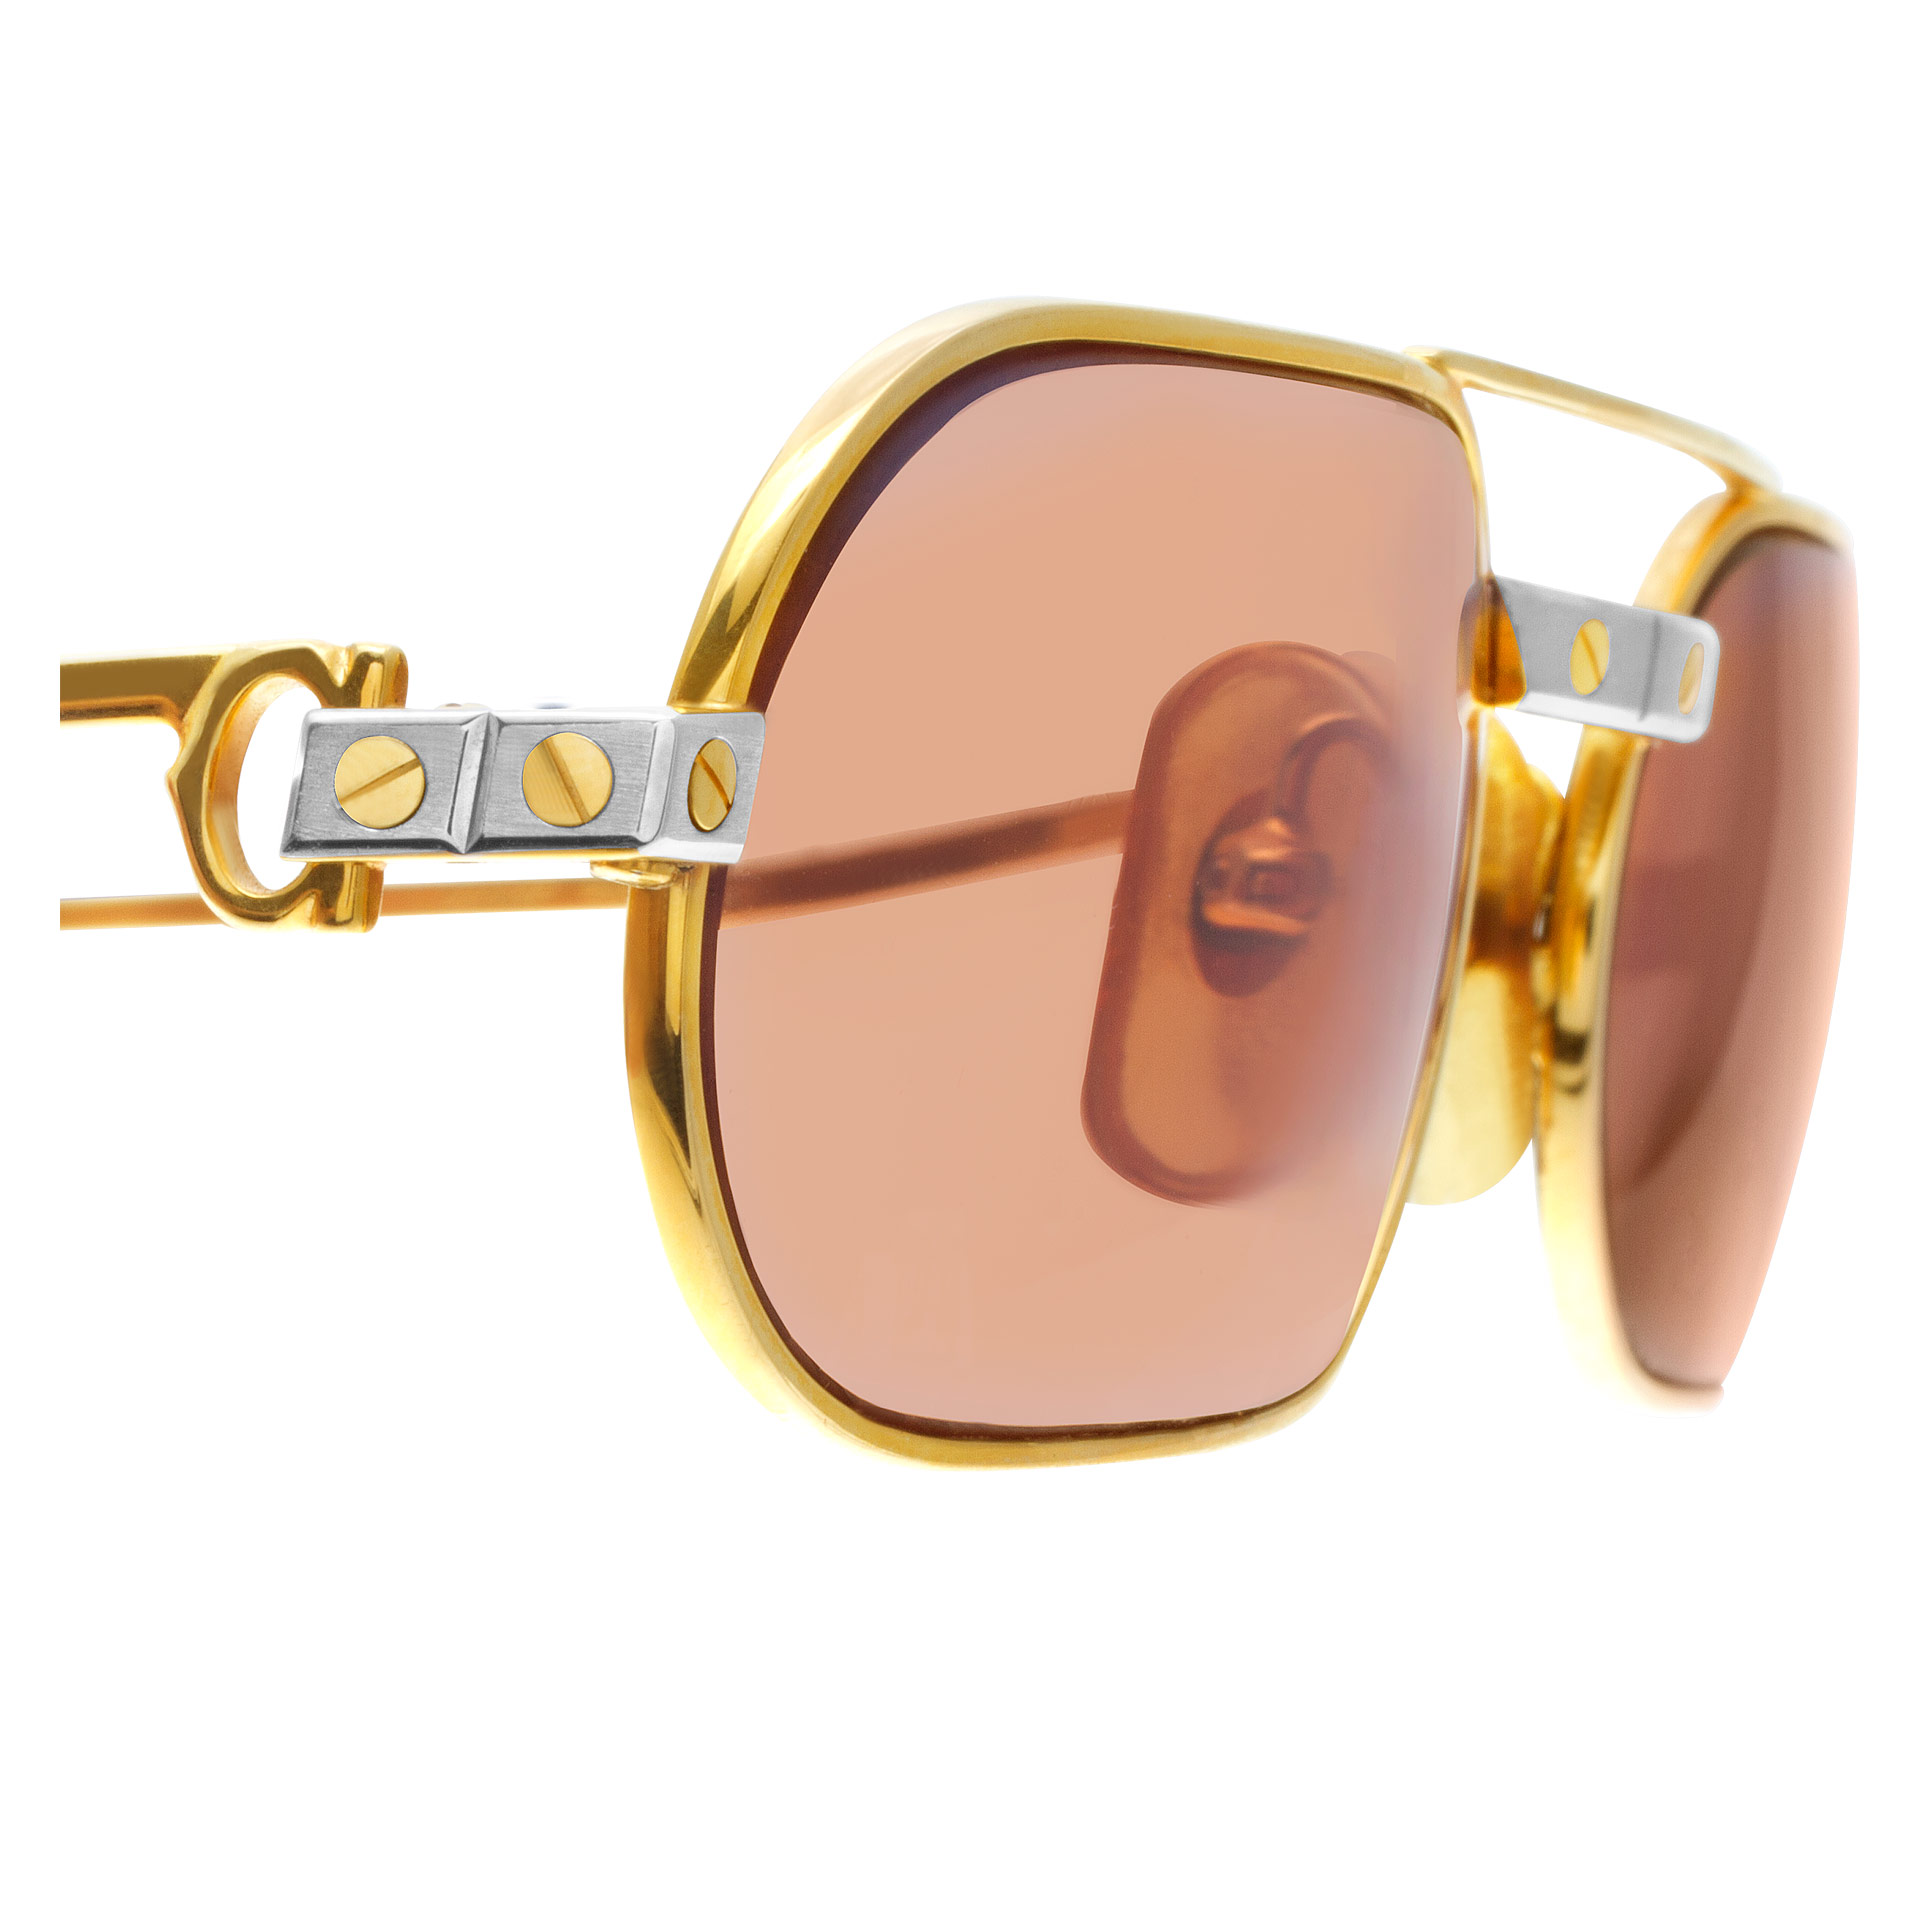 Cartier Santos glasses in gold plate image 3